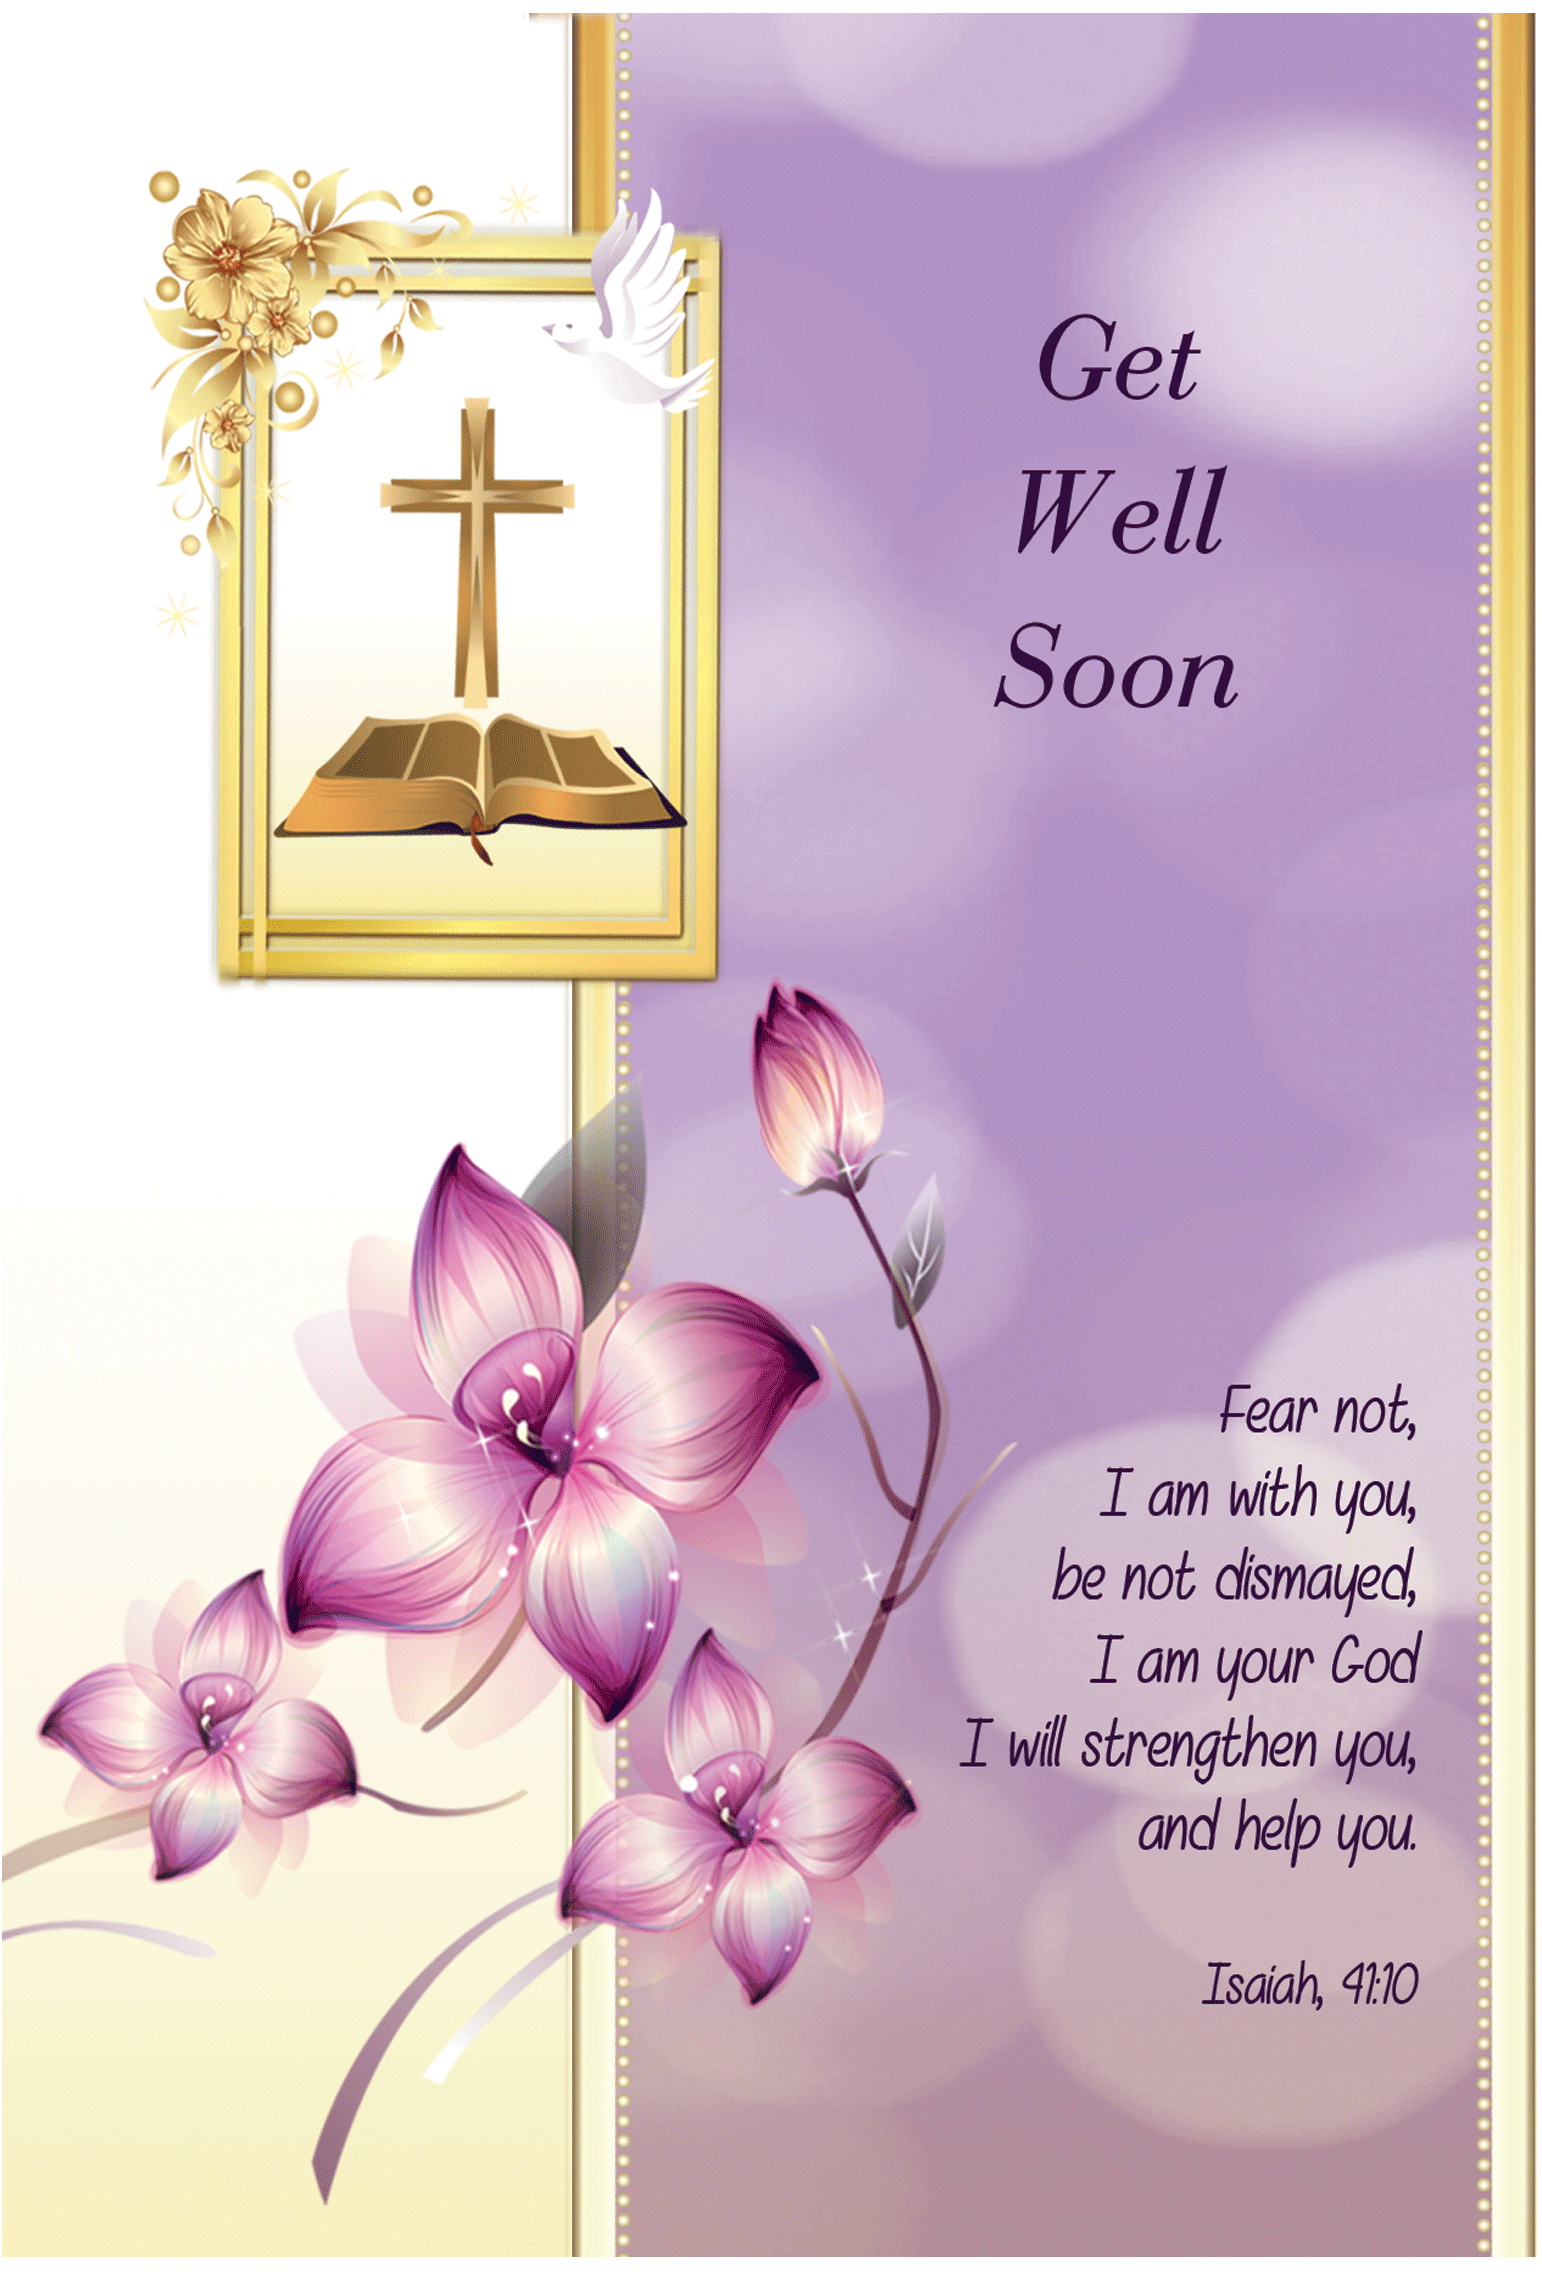 Printable Religious Get Well Cards